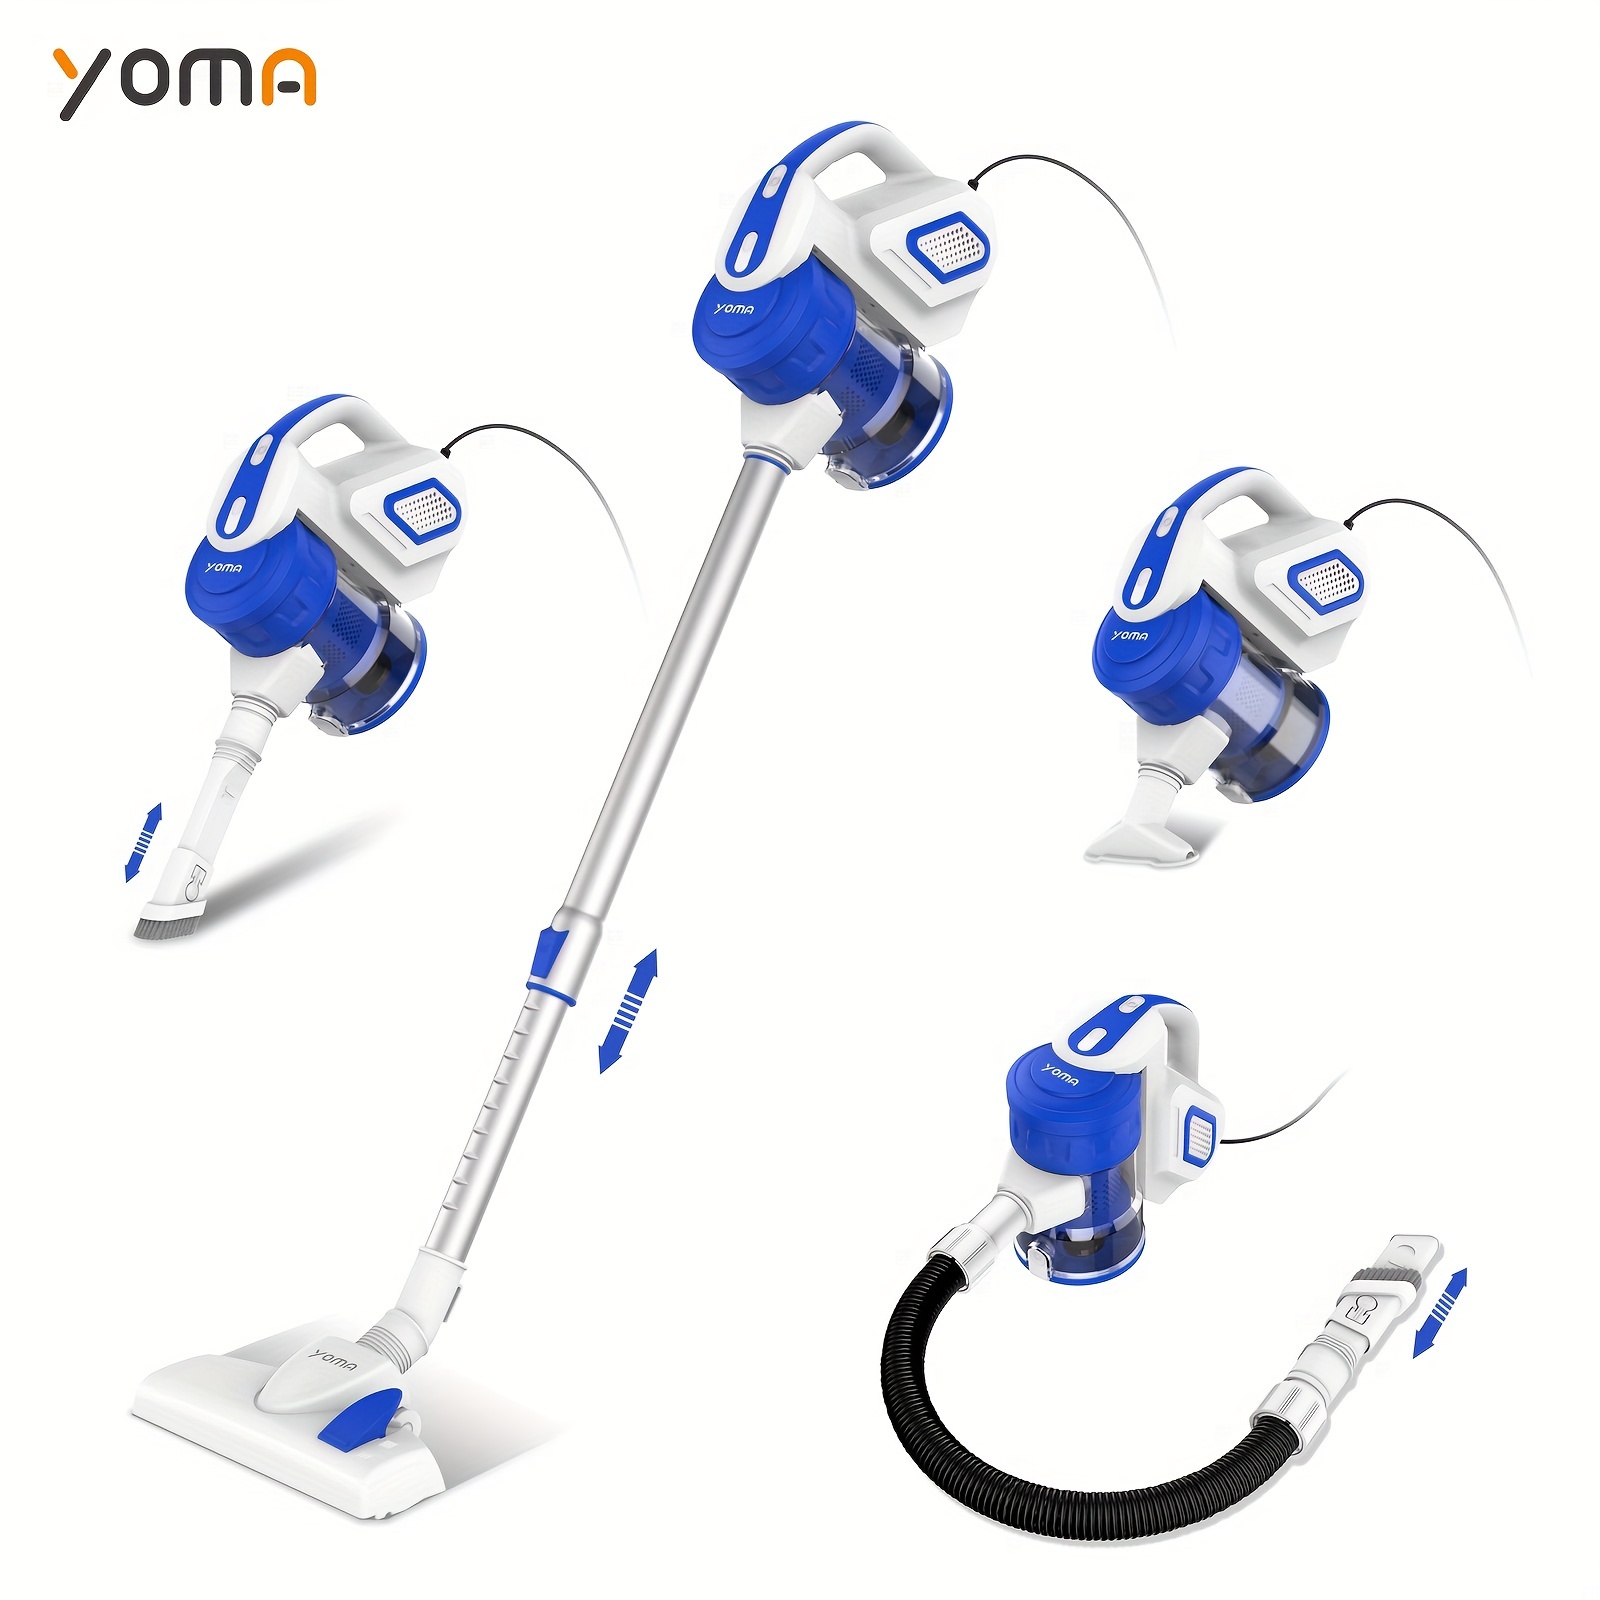 

Yoma Corded Vacuum Cleaner M2252, [6 In 1] 600w 20kpa Suction Stick Vacuum Cleaner, 24 Ft Hardwood , Lightweight Vacuum With Multi-tool & Soft Tube For Pet Hair, Hardwood, Stair - Blue